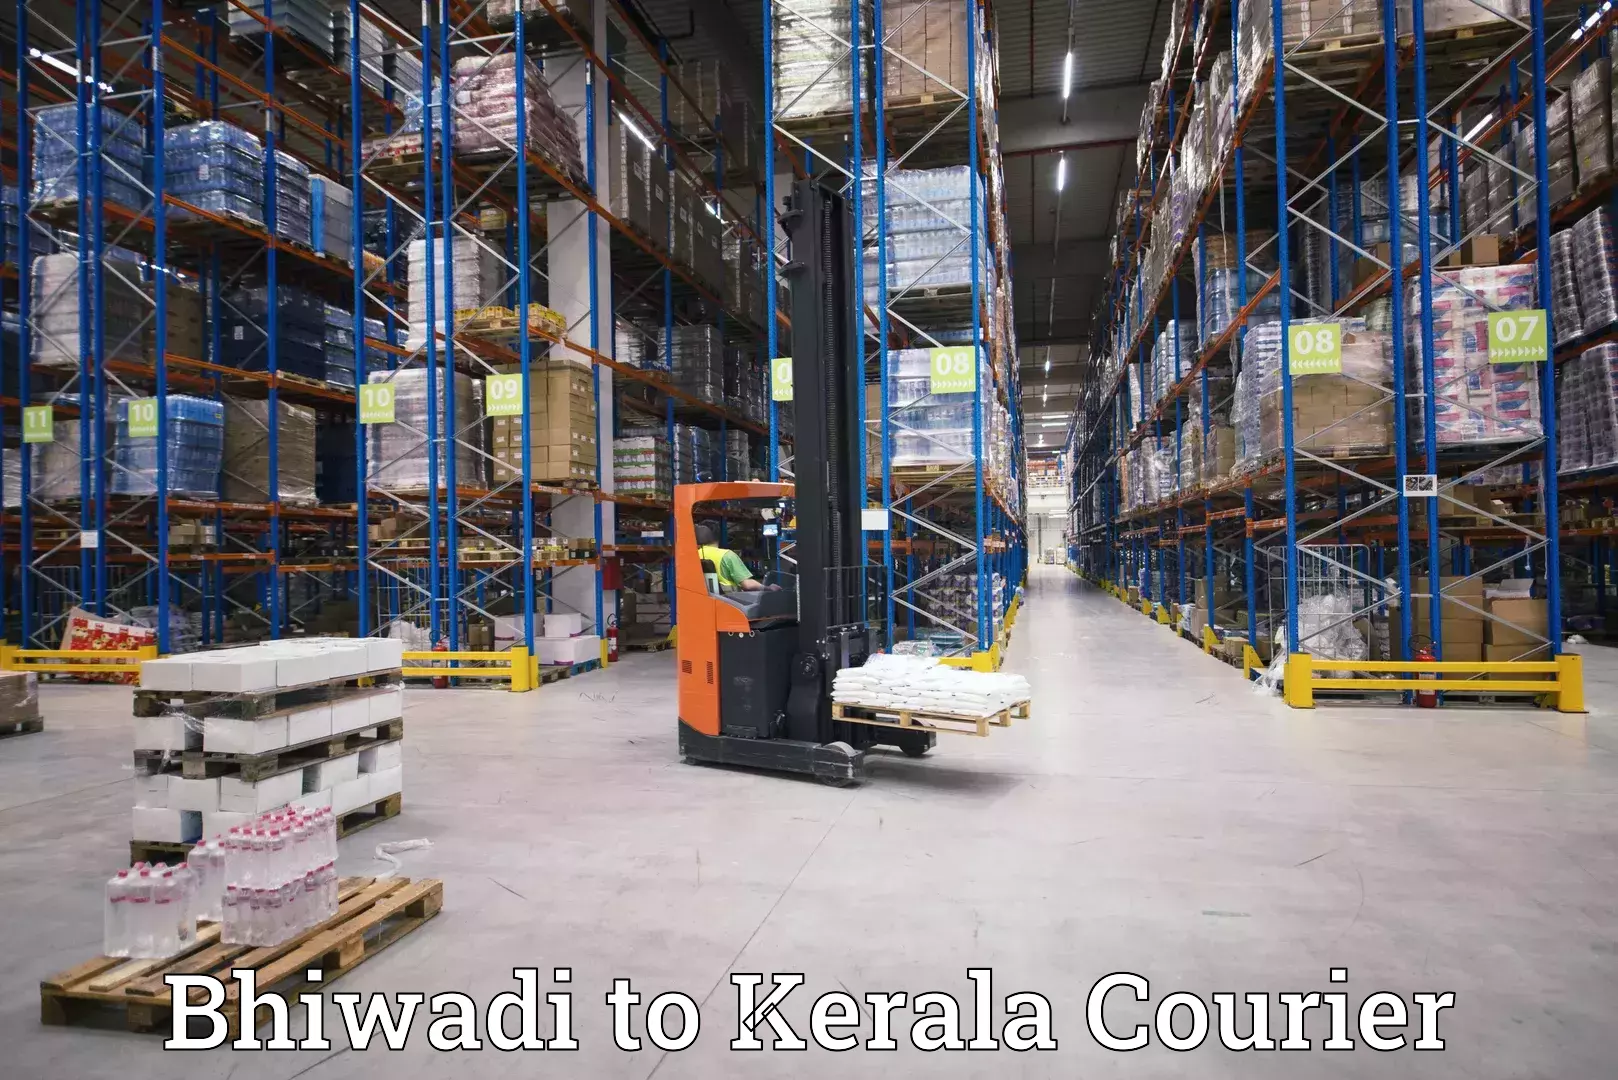 Express delivery network in Bhiwadi to Guruvayur